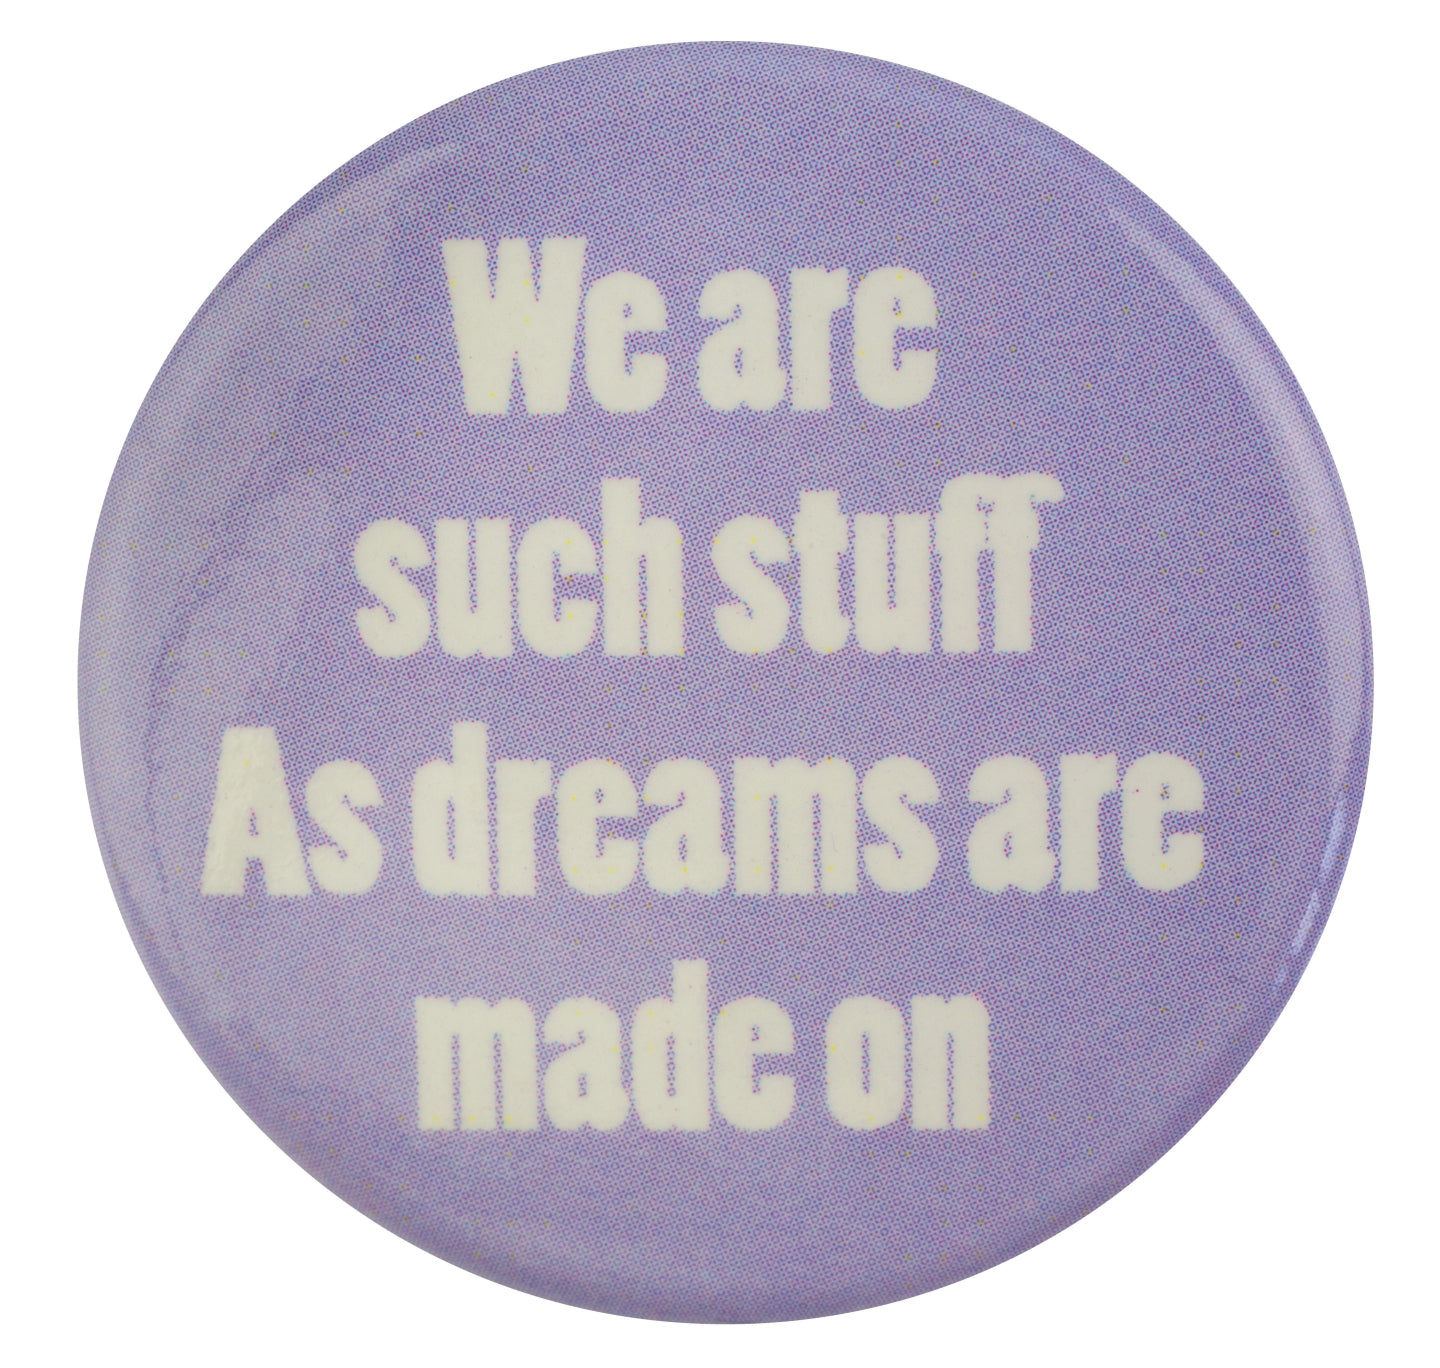 Badge: We Are Such Stuff As Dreams Are Made On